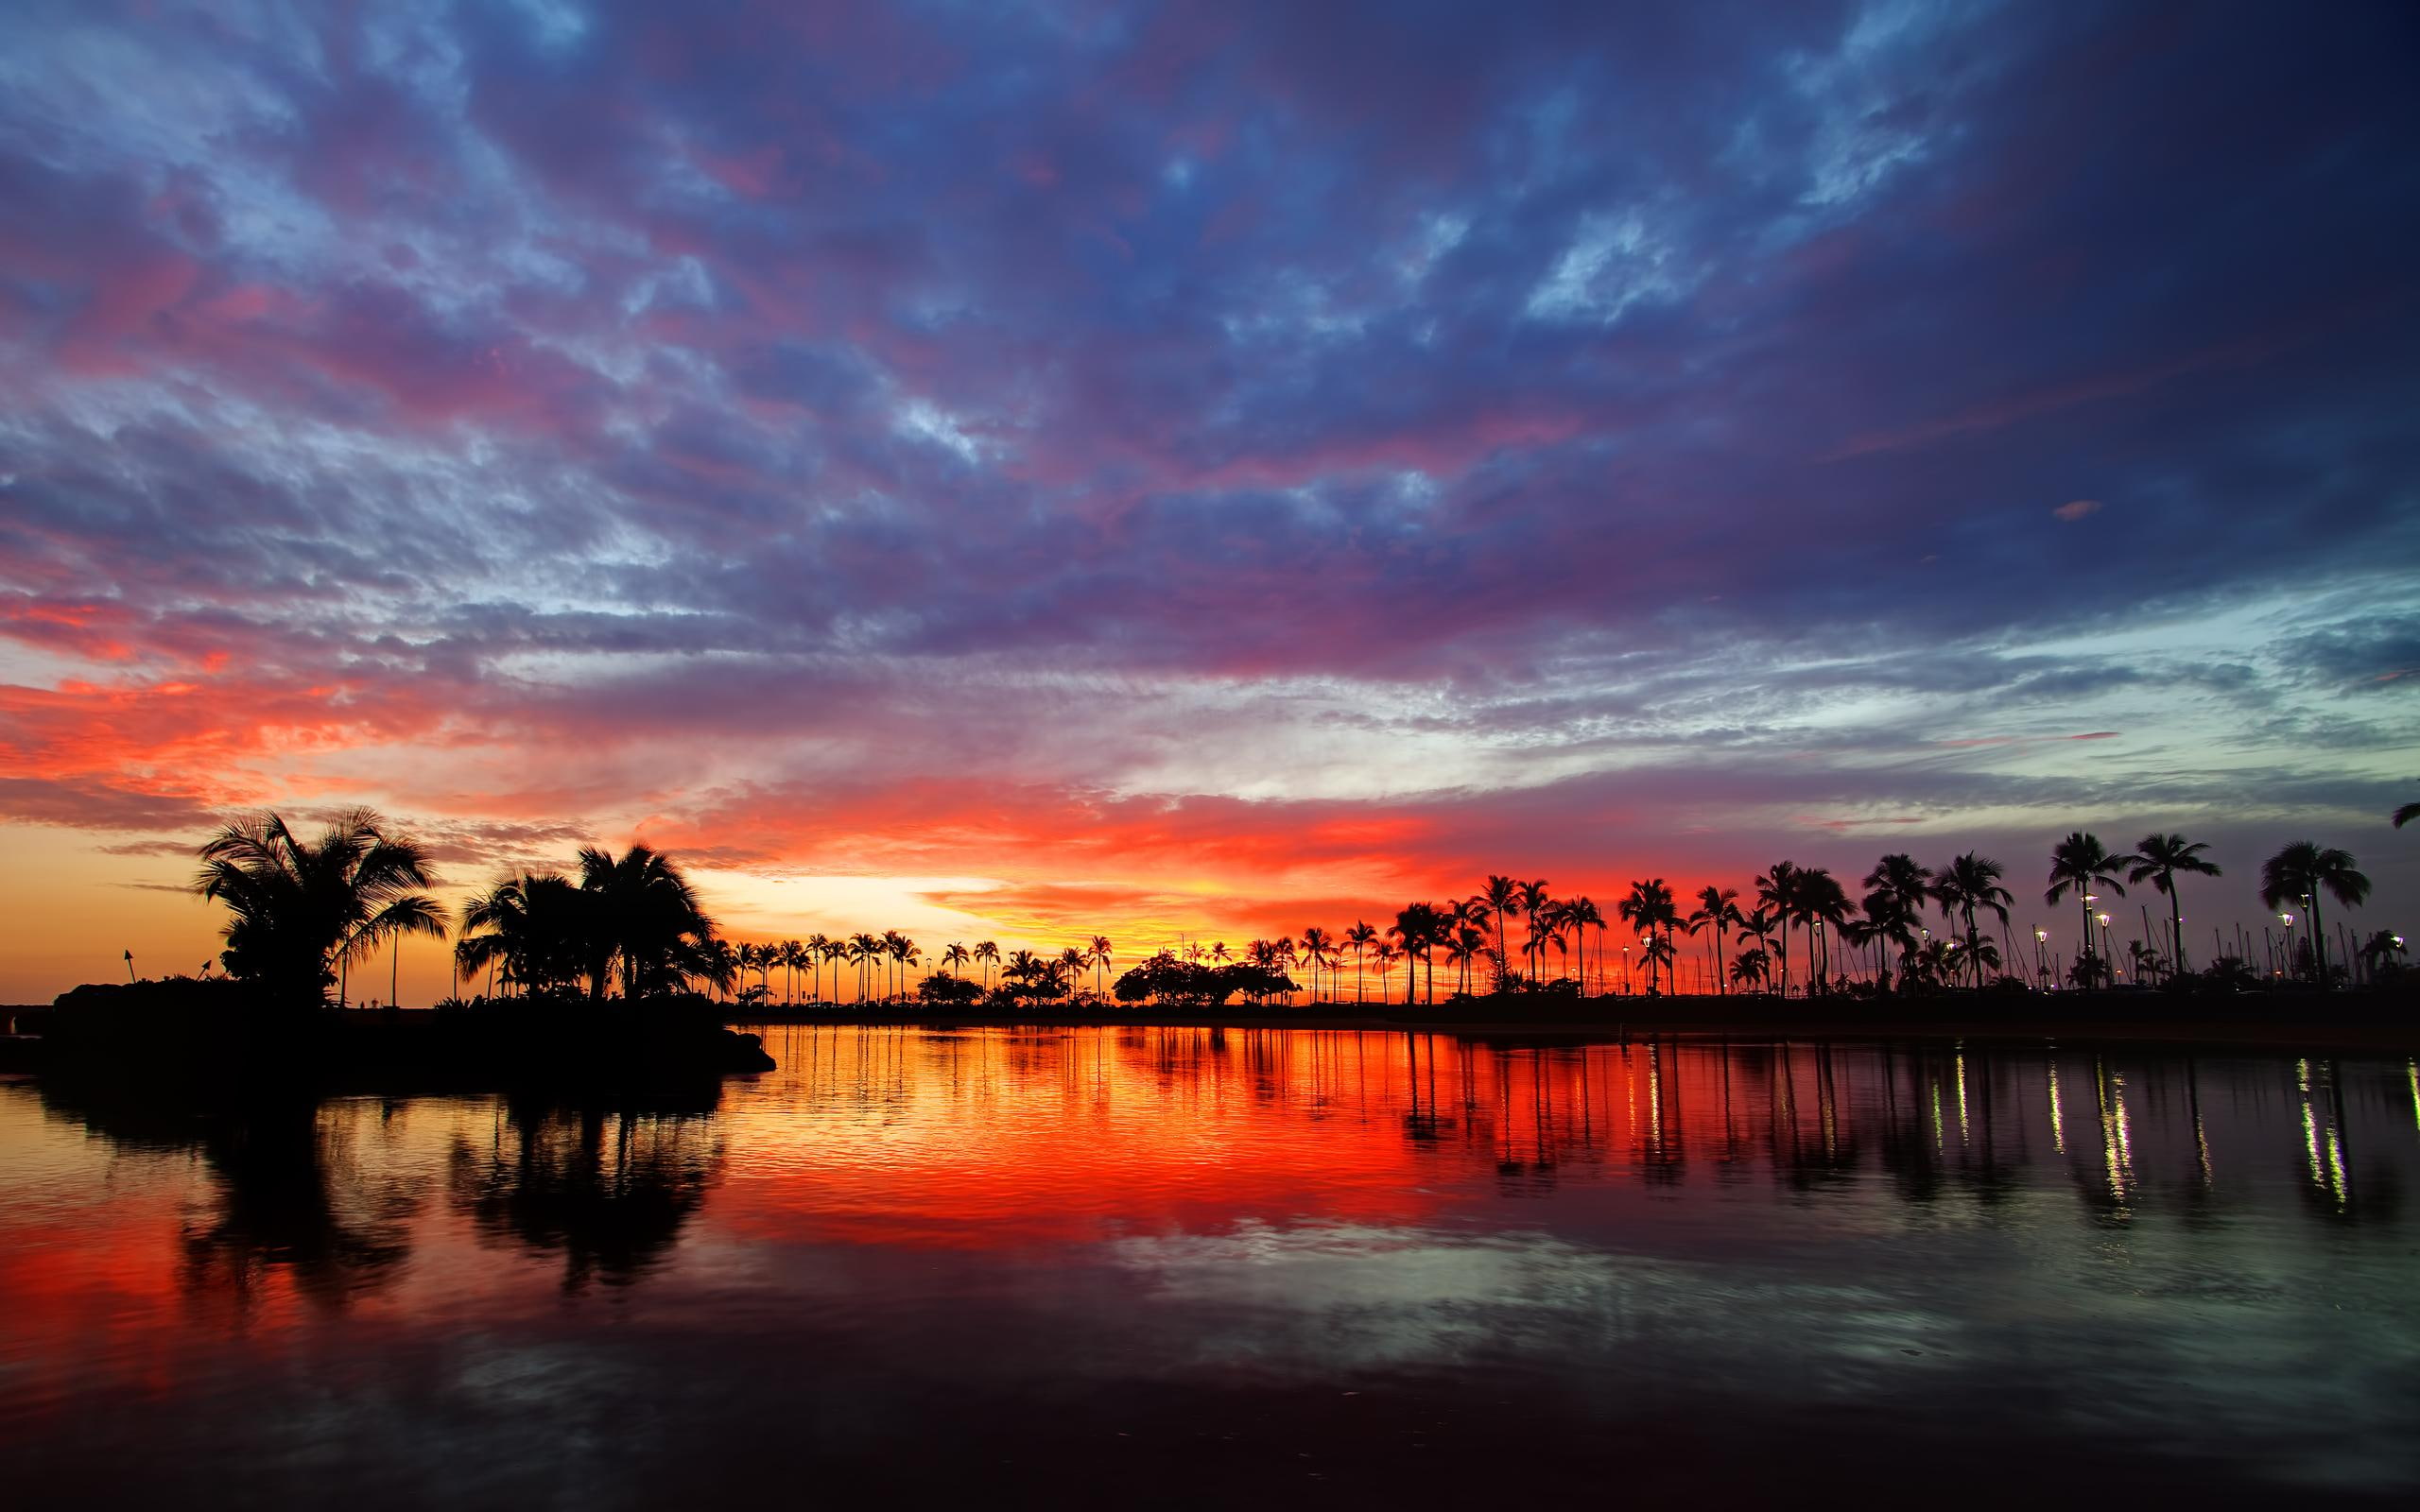 Sunset In Hawaii, lovely, view, red sunset, palms, beautiful